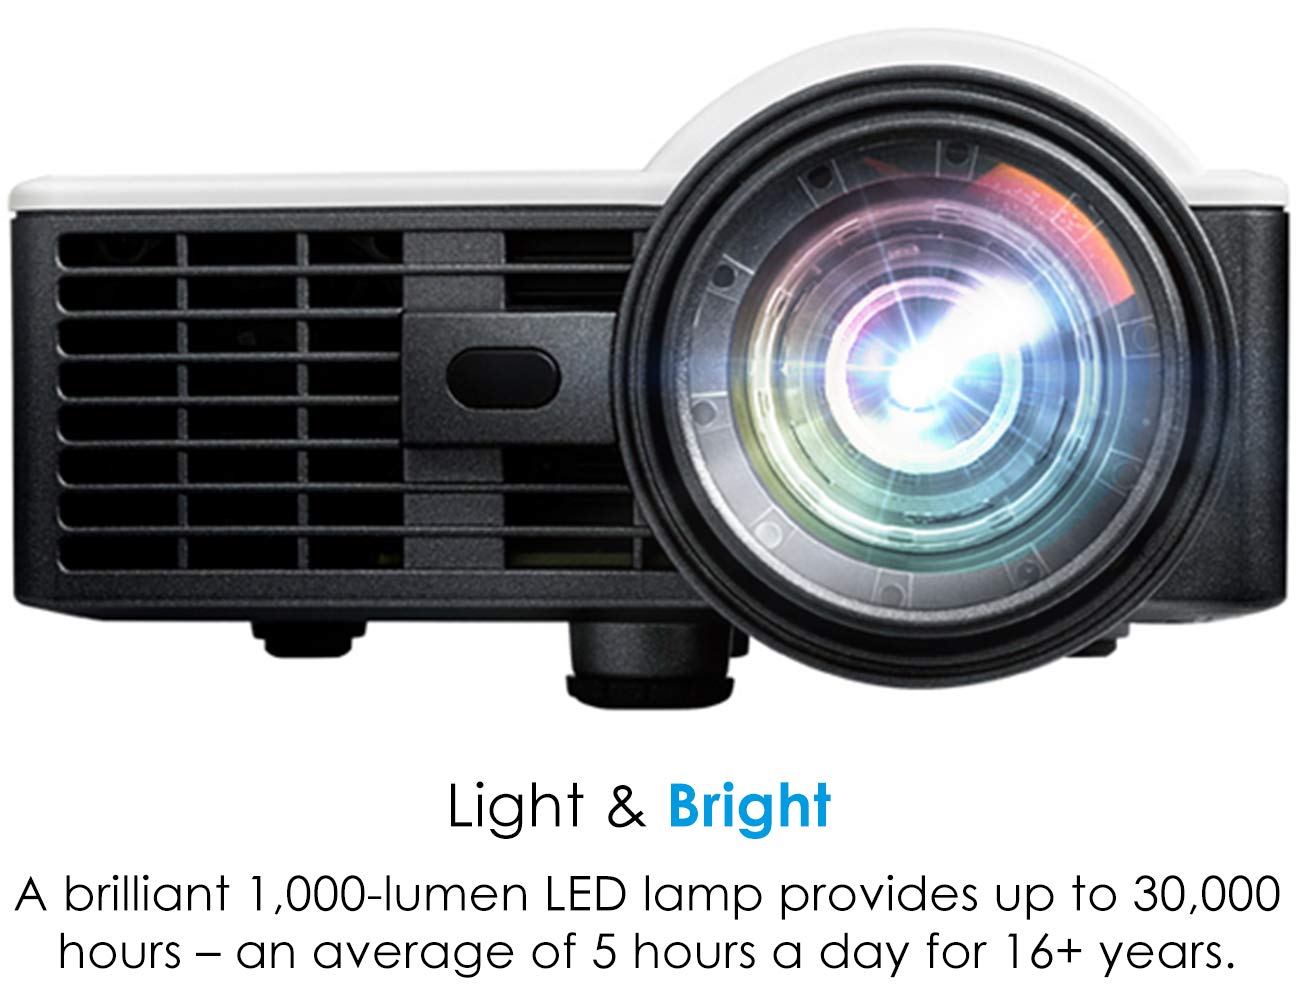 Optoma Portable LED Projector | 1000 lumens with Auto Focus | ML1050ST+